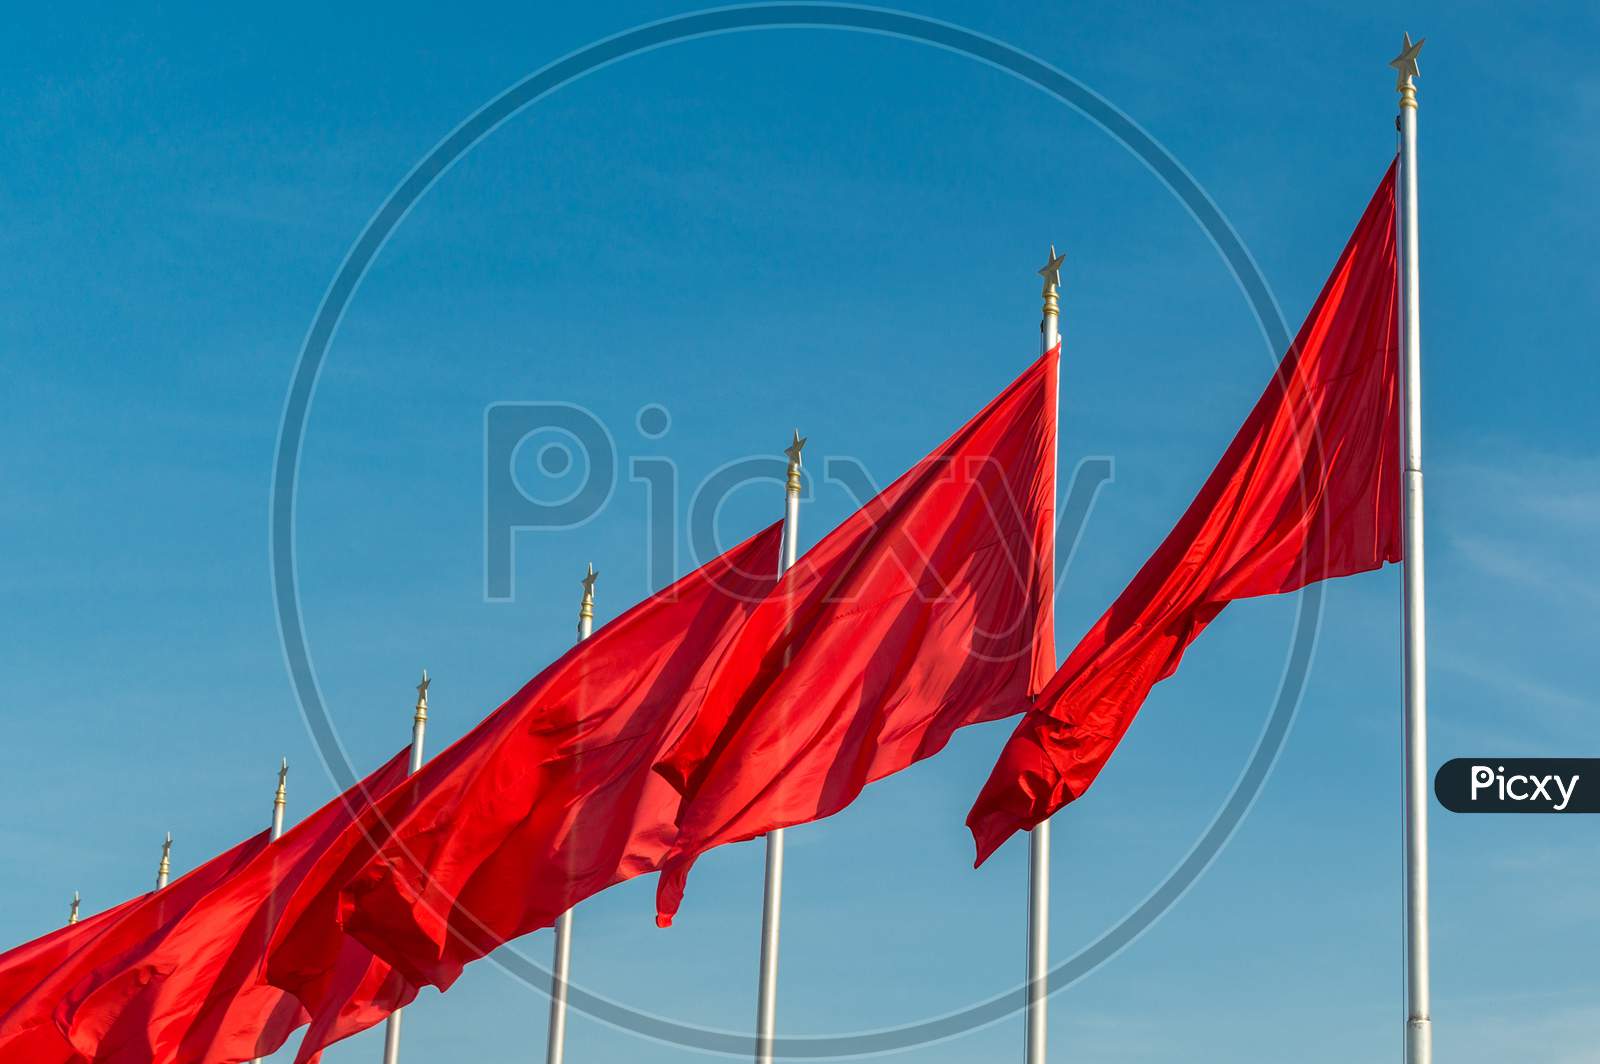 Red Banners Unfurled In The Wind At Tiananmen Square In Beijing, China